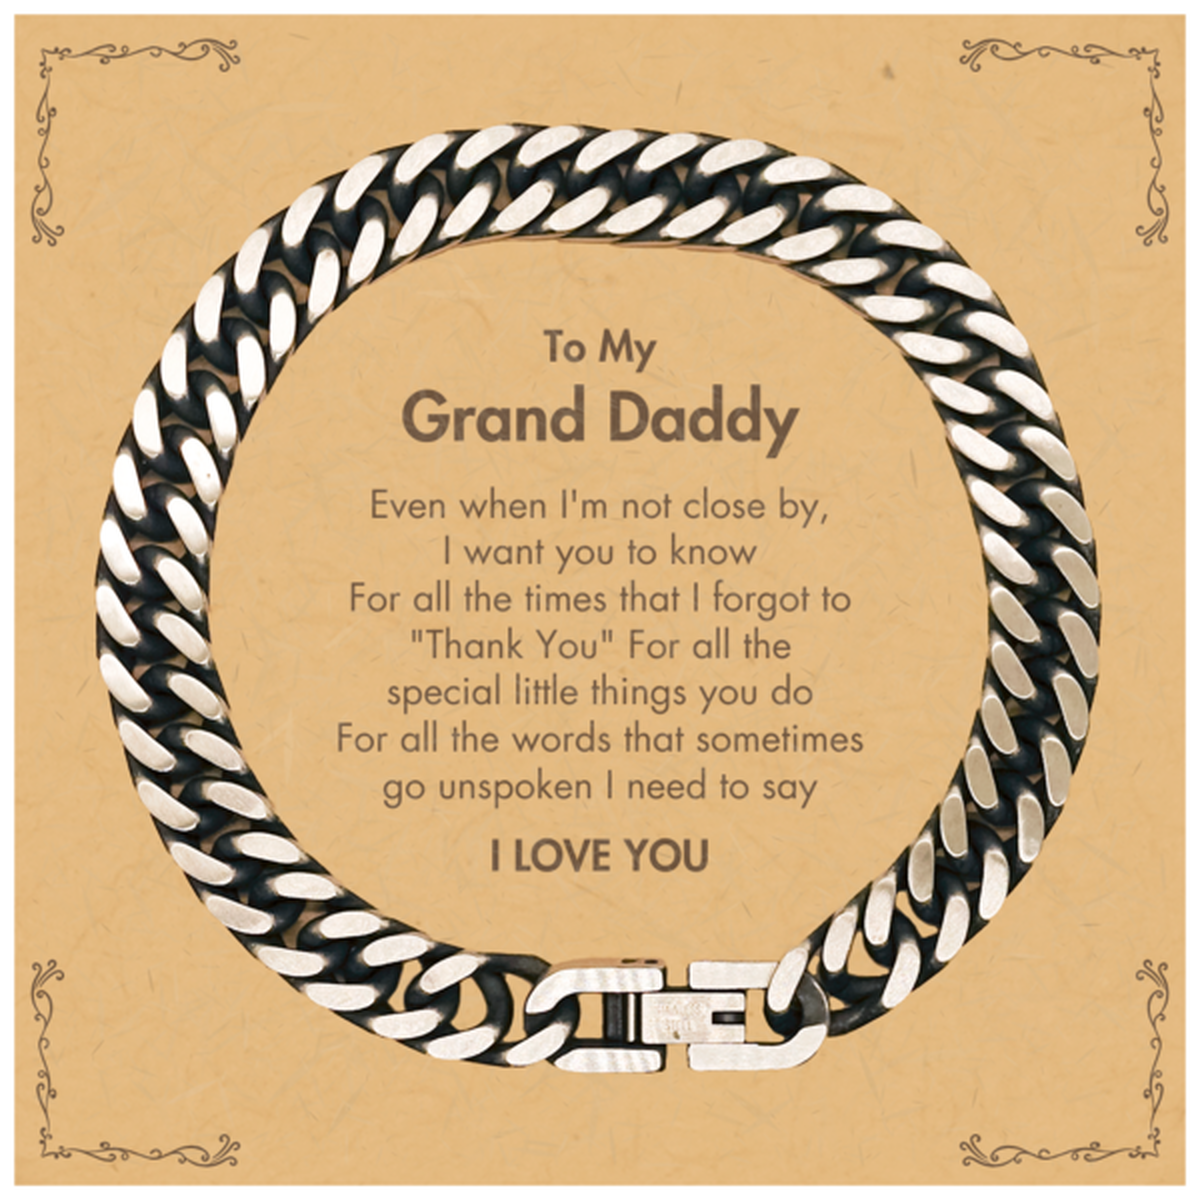 Thank You Gifts for Grand Daddy, Keepsake Cuban Link Chain Bracelet Gifts for Grand Daddy Birthday Mother's day Father's Day Grand Daddy For all the words That sometimes go unspoken I need to say I LOVE YOU